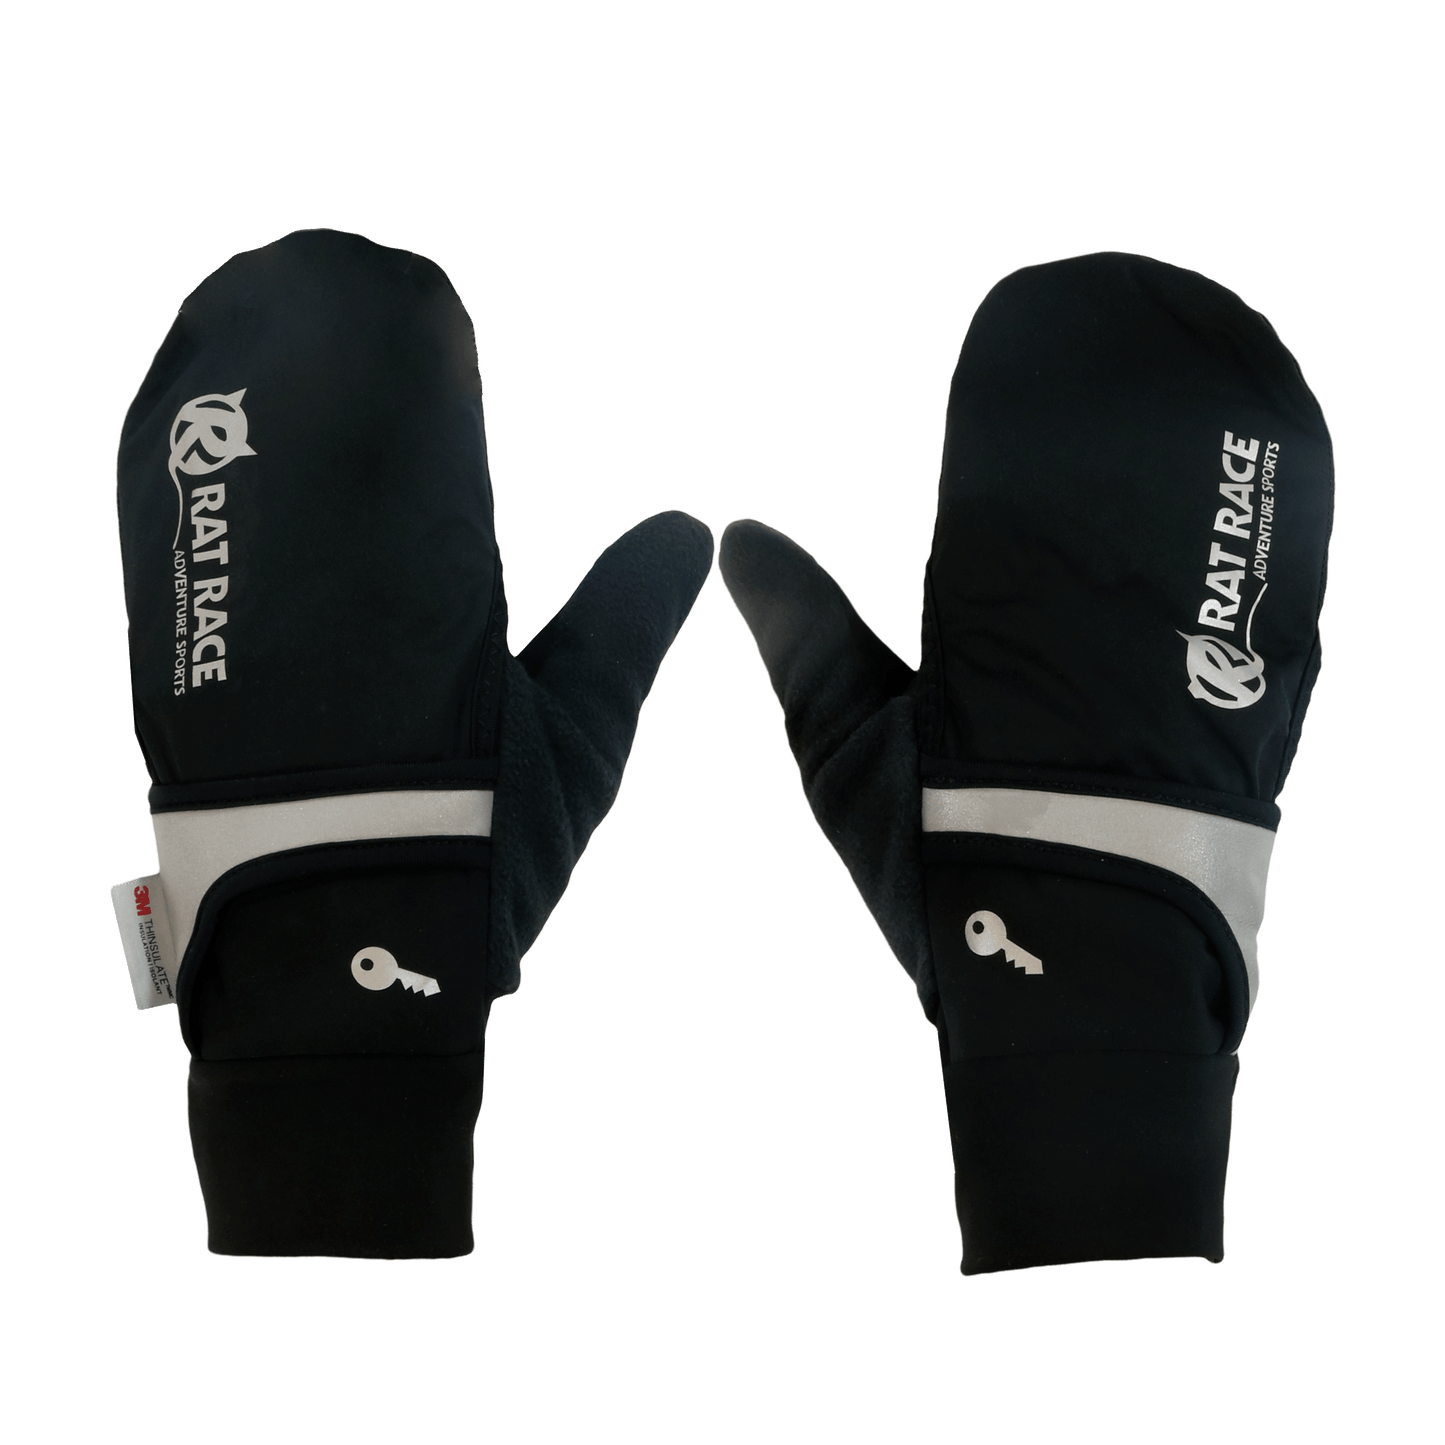 Rat Race Sea to Summit Glove - with pull-out mitt